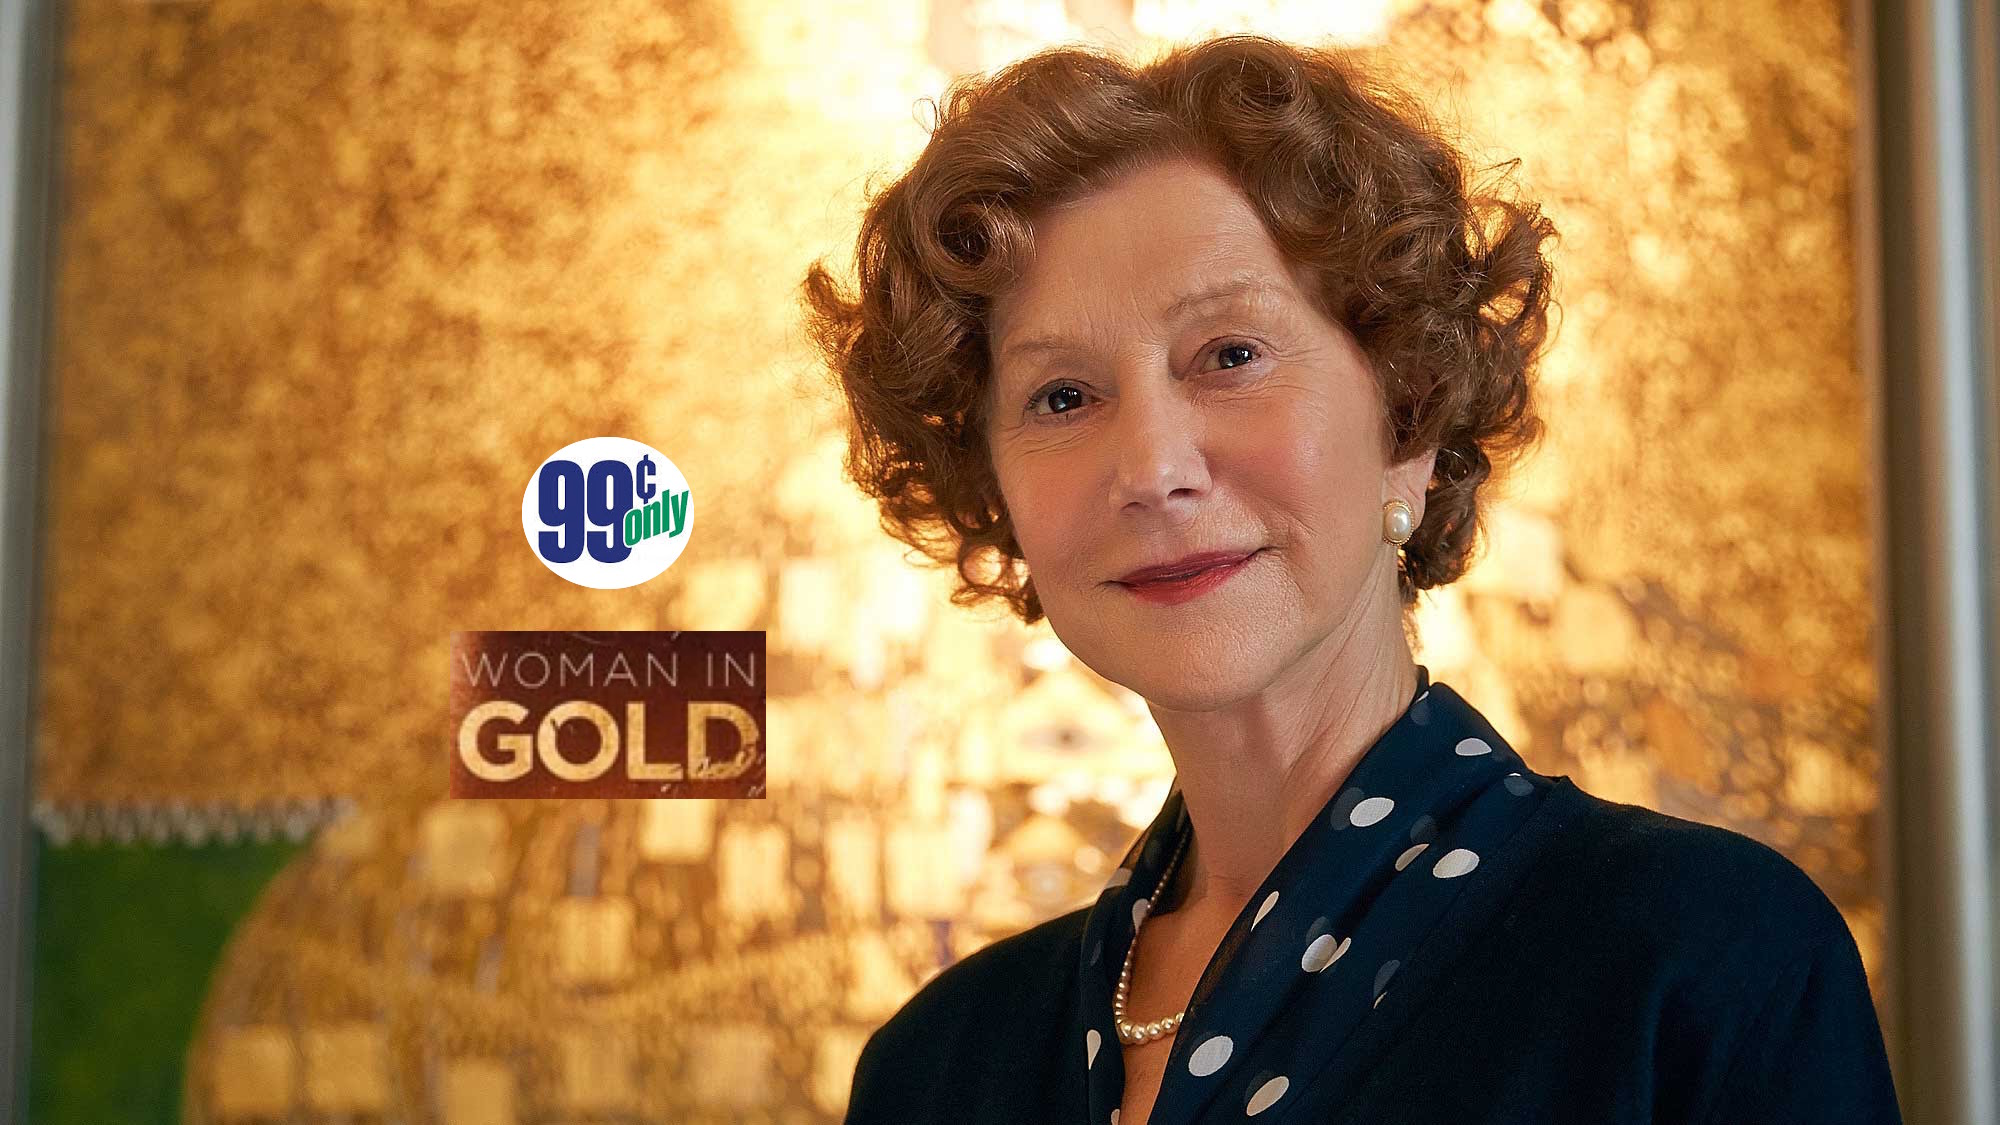 The itunes 99 cent movie rental of the week: ‘woman in gold’